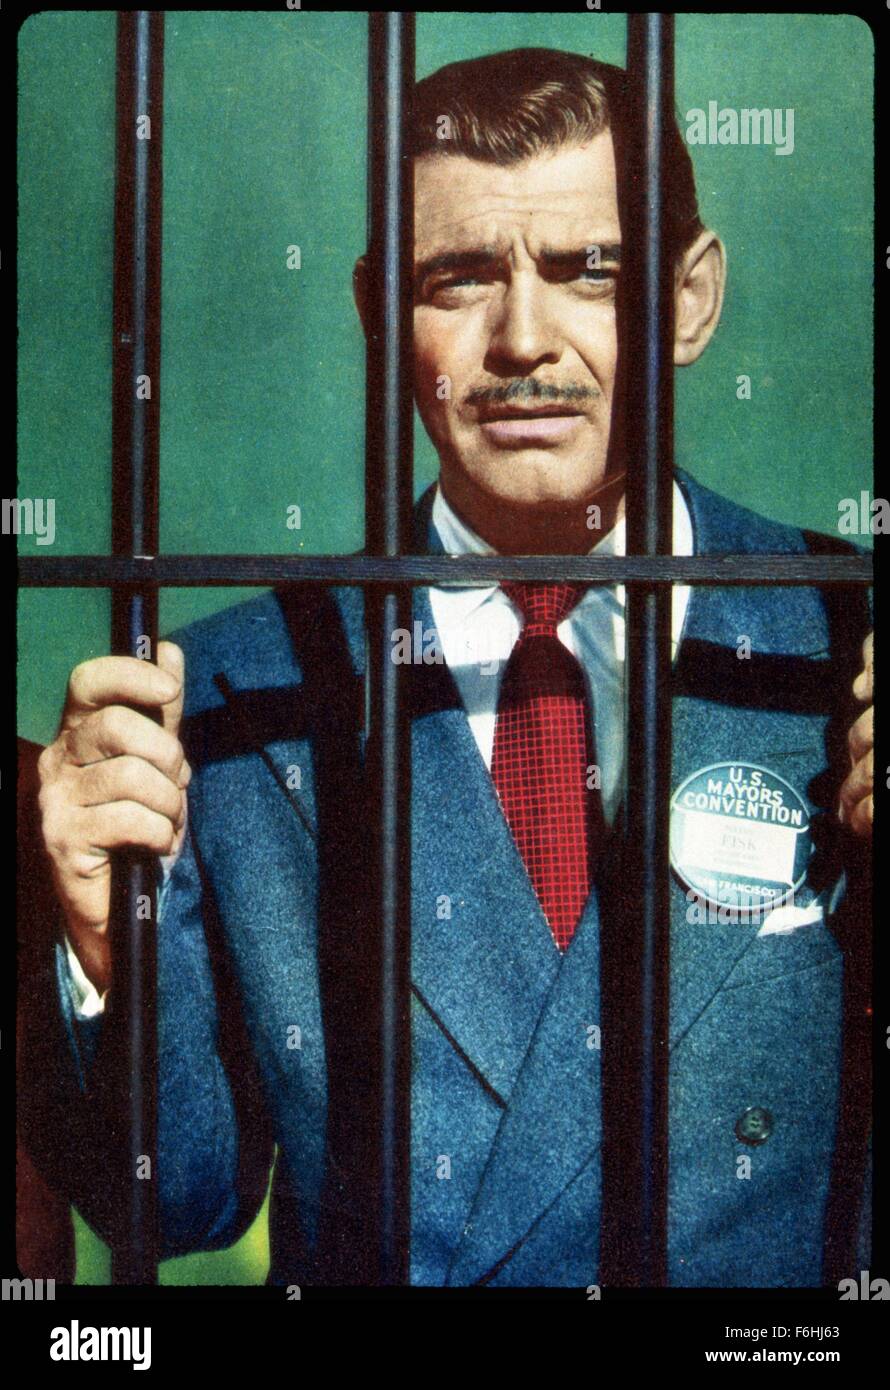 1950, Film Title: KEY TO THE CITY, Director: GEORGE SIDNEY, Studio: MGM, Pictured: BEHIND BARS (IN JAIL), CLARK GABLE. (Credit Image: SNAP) Stock Photo